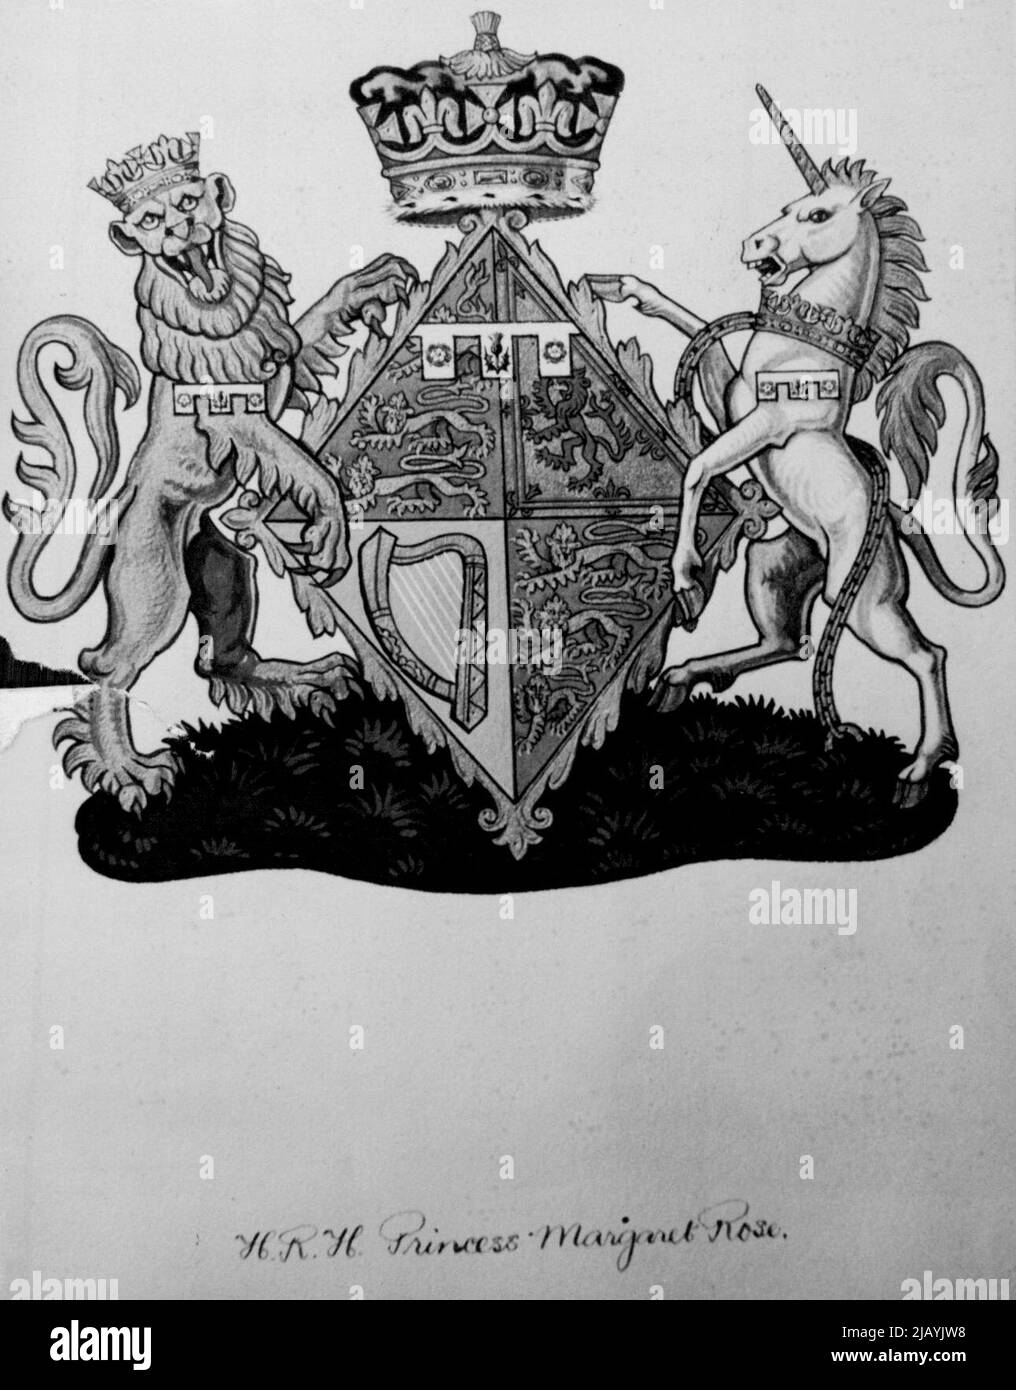 Coats-Of-Arms For Princesses -- Coats-of Arms for Princess Elizabeth and Princess Margaret have been approved by the King. The designs, prepared by Sir Gerald Wollaston before he retired from the post of Garter king of Arms, each consists of the Royal Arms with a label of Heraldic devices indicating their positions as daughters of the Sovereign. The label of Princess Elizabeth is of three points, the centre point charged with the Tudor Rose and each of the ***** with a St. George's Cross. Princess Margaret's label has the centre ***** charged with the Thistle and ***** the others with the Tudo Stock Photo